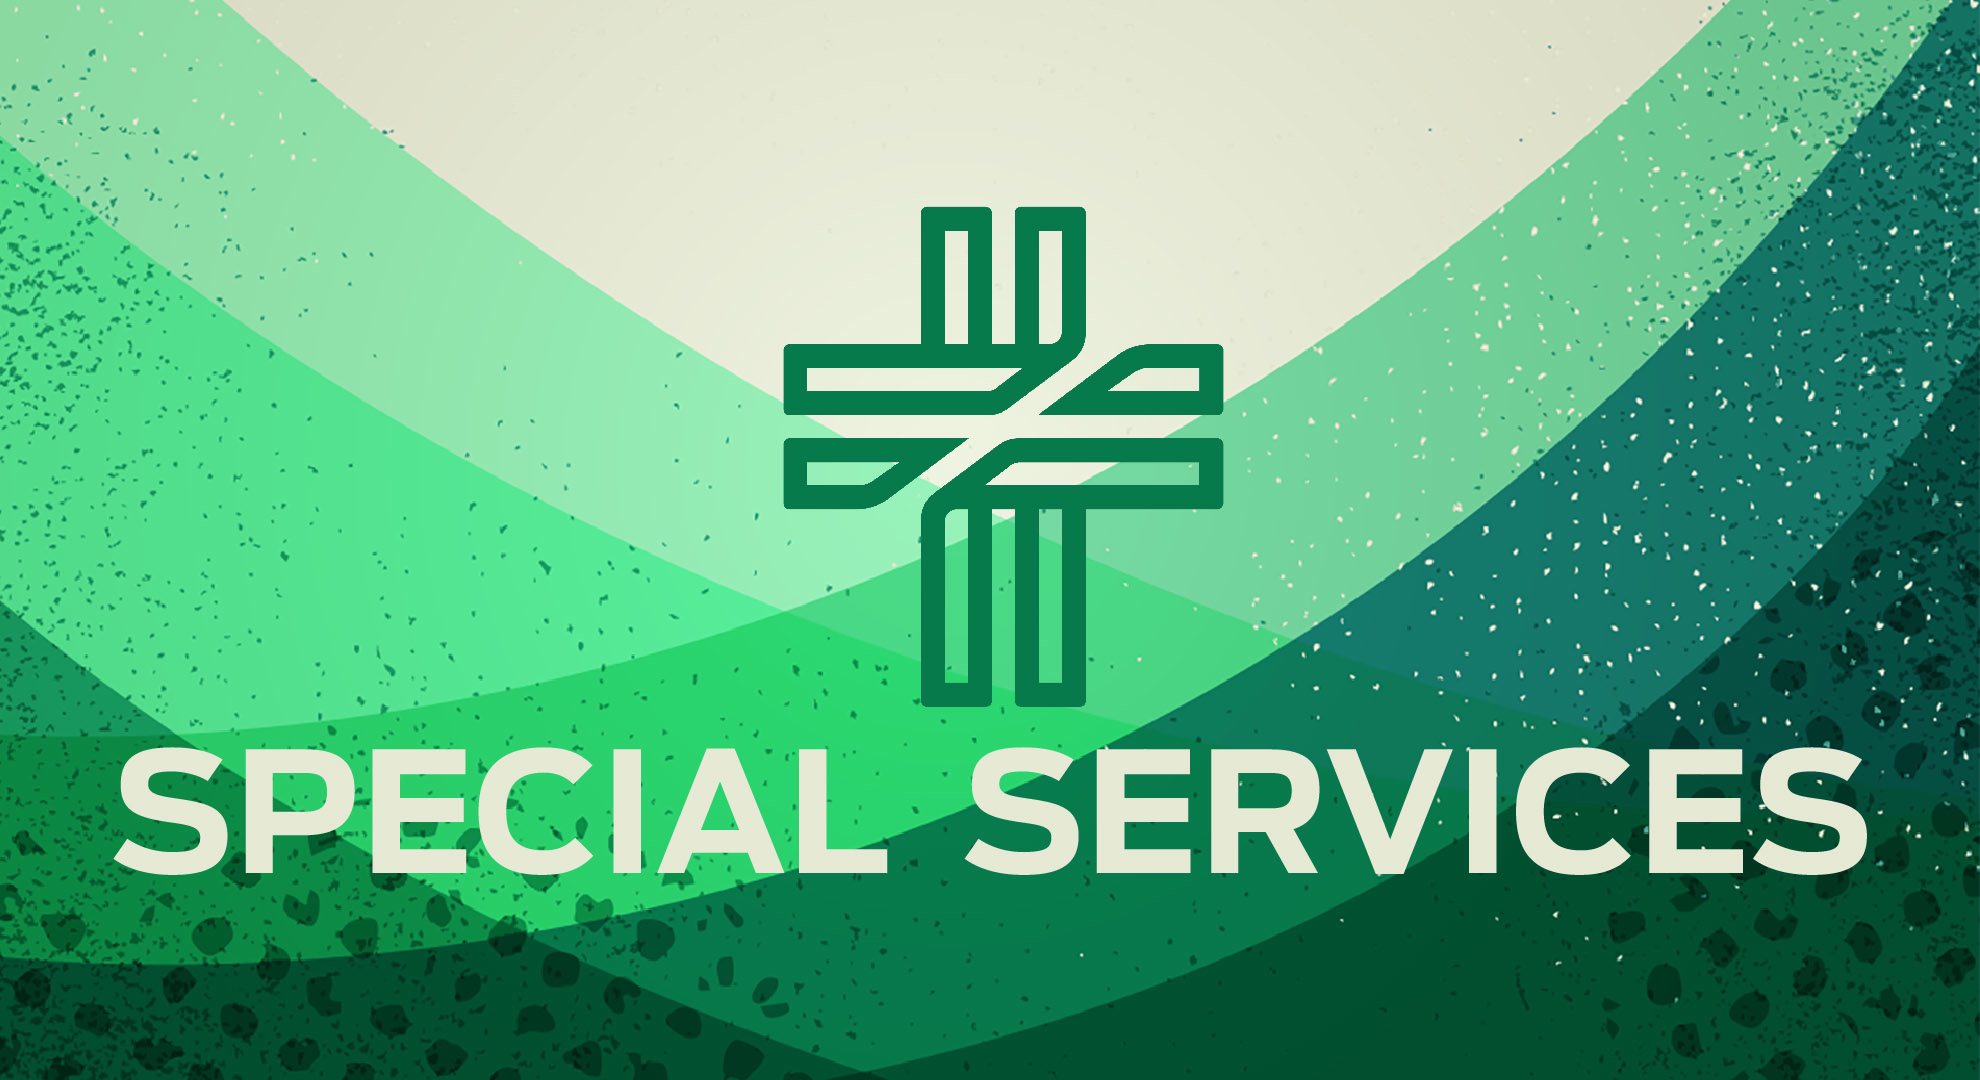 Special Services 2020